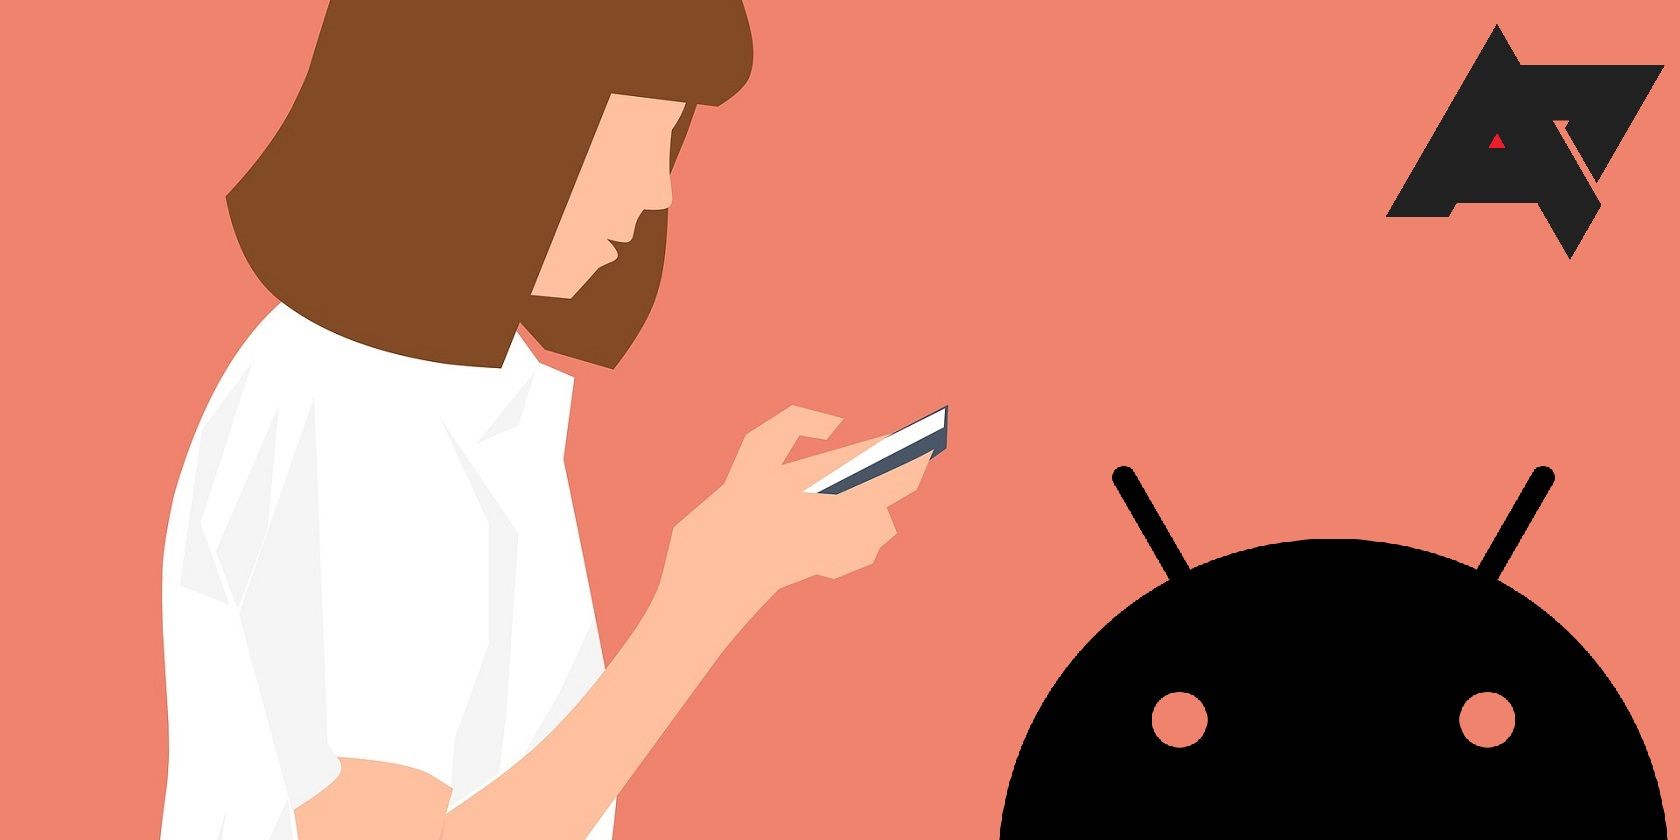 Illustration of a girl texting with the Android mascot to her right.